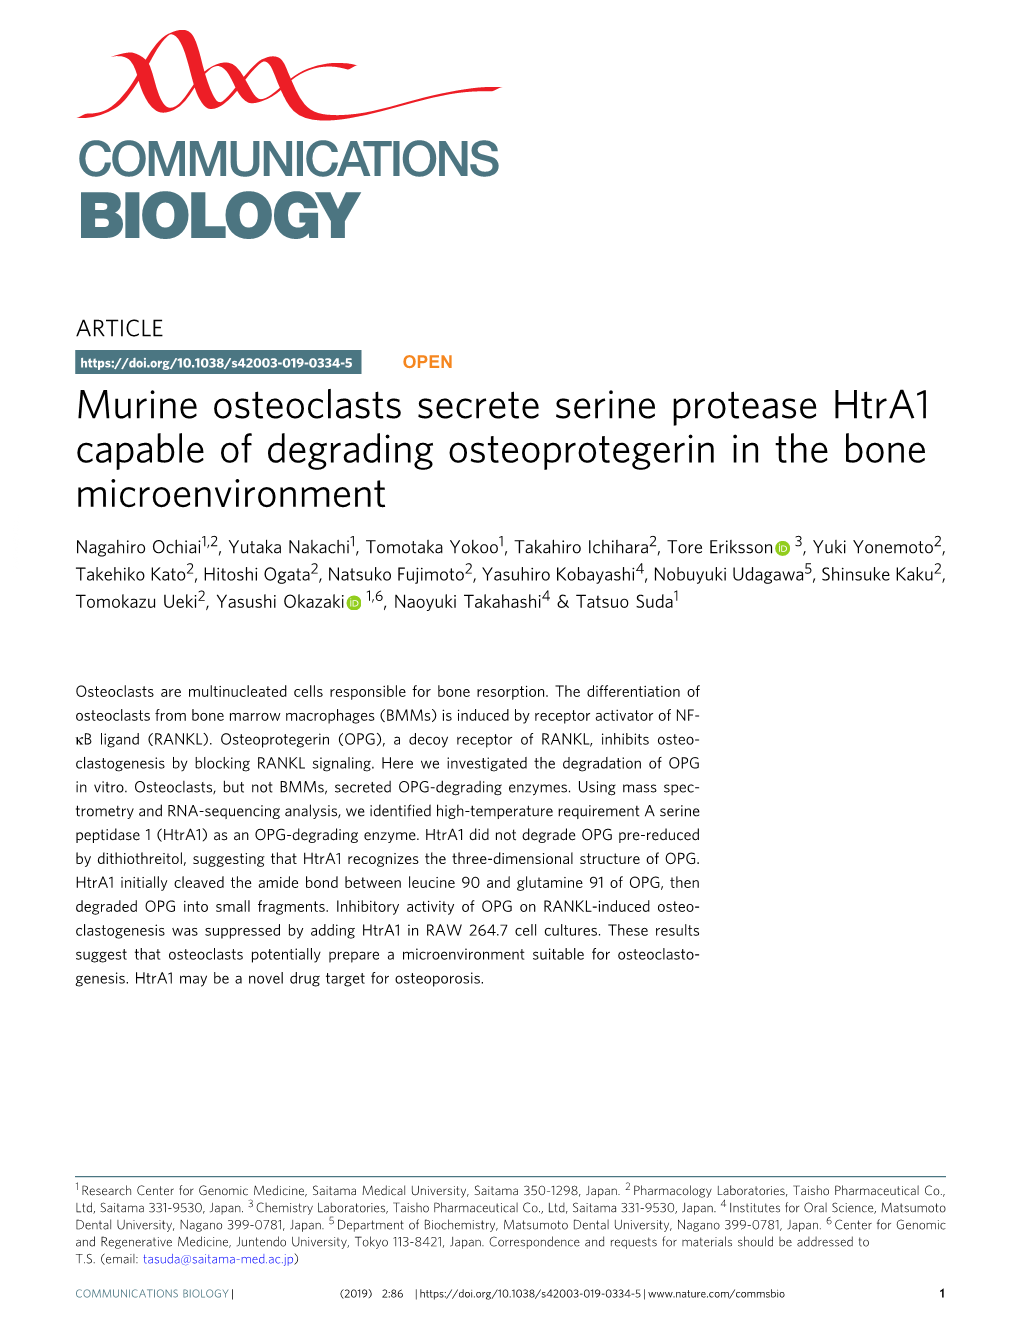 Murine Osteoclasts Secrete Serine Protease Htra1 Capable of Degrading Osteoprotegerin in the Bone Microenvironment